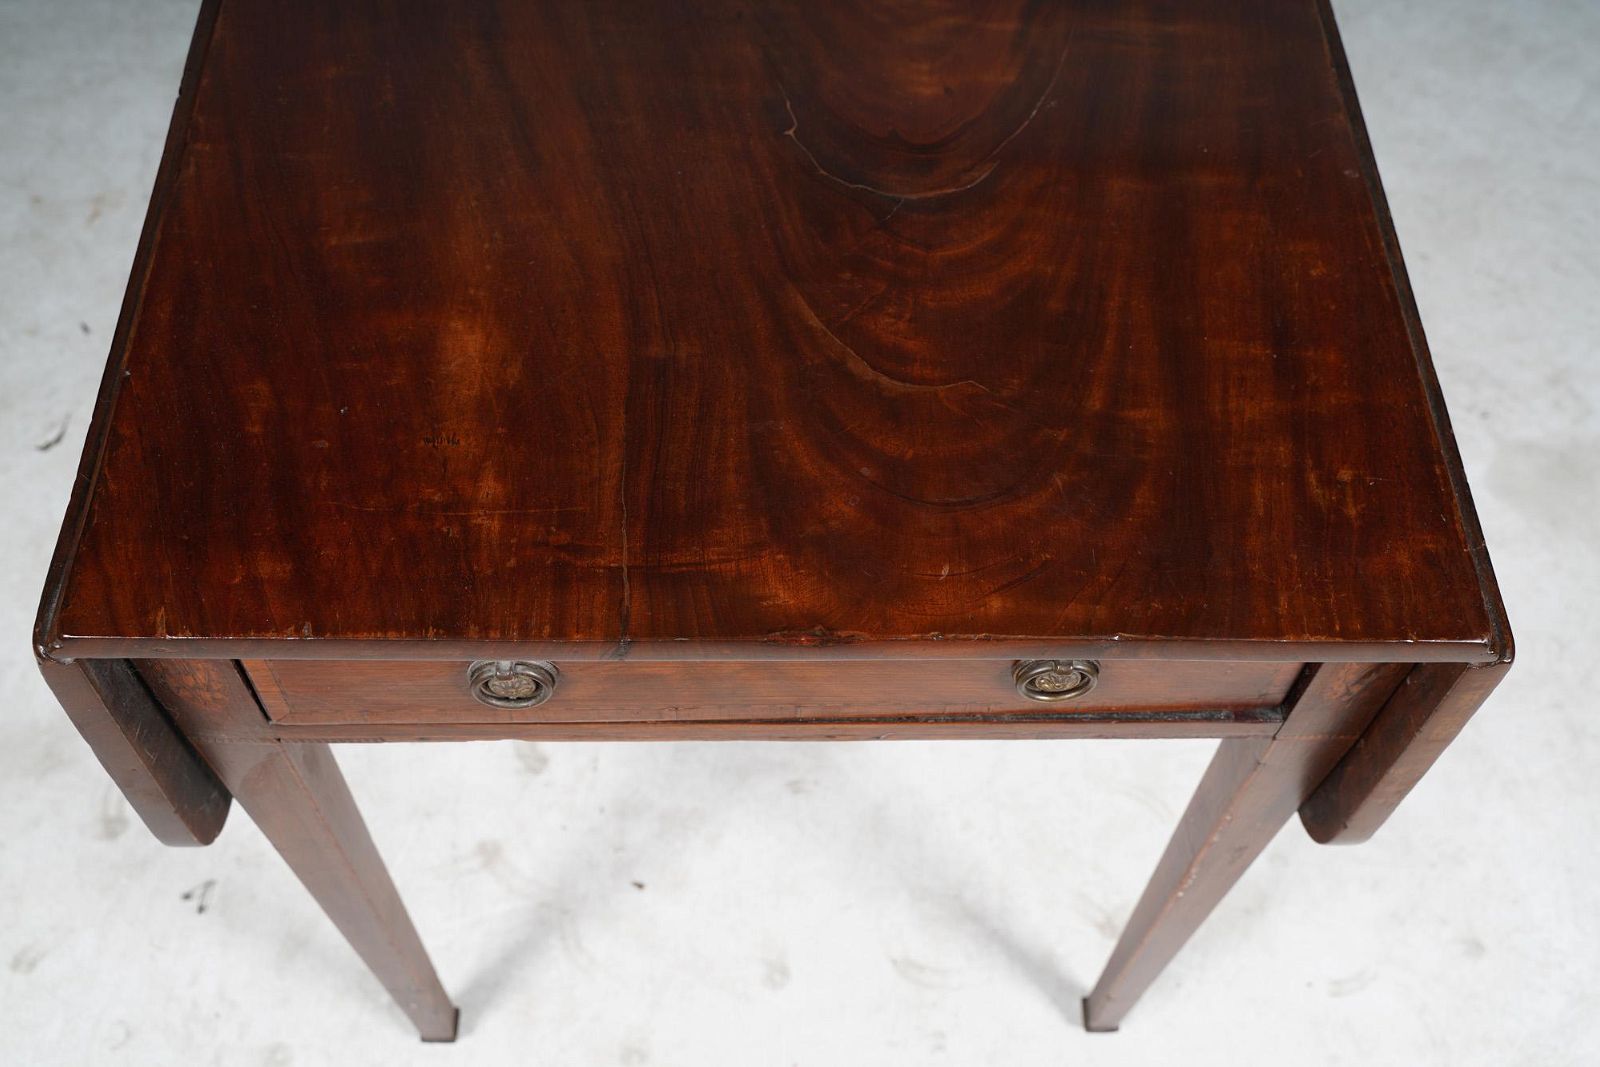 AF1-159: ANTIQUE EARLY 19TH CENTURY HEPPLEWHITE INLAID MAHOGANY PEMBROKE TABLE